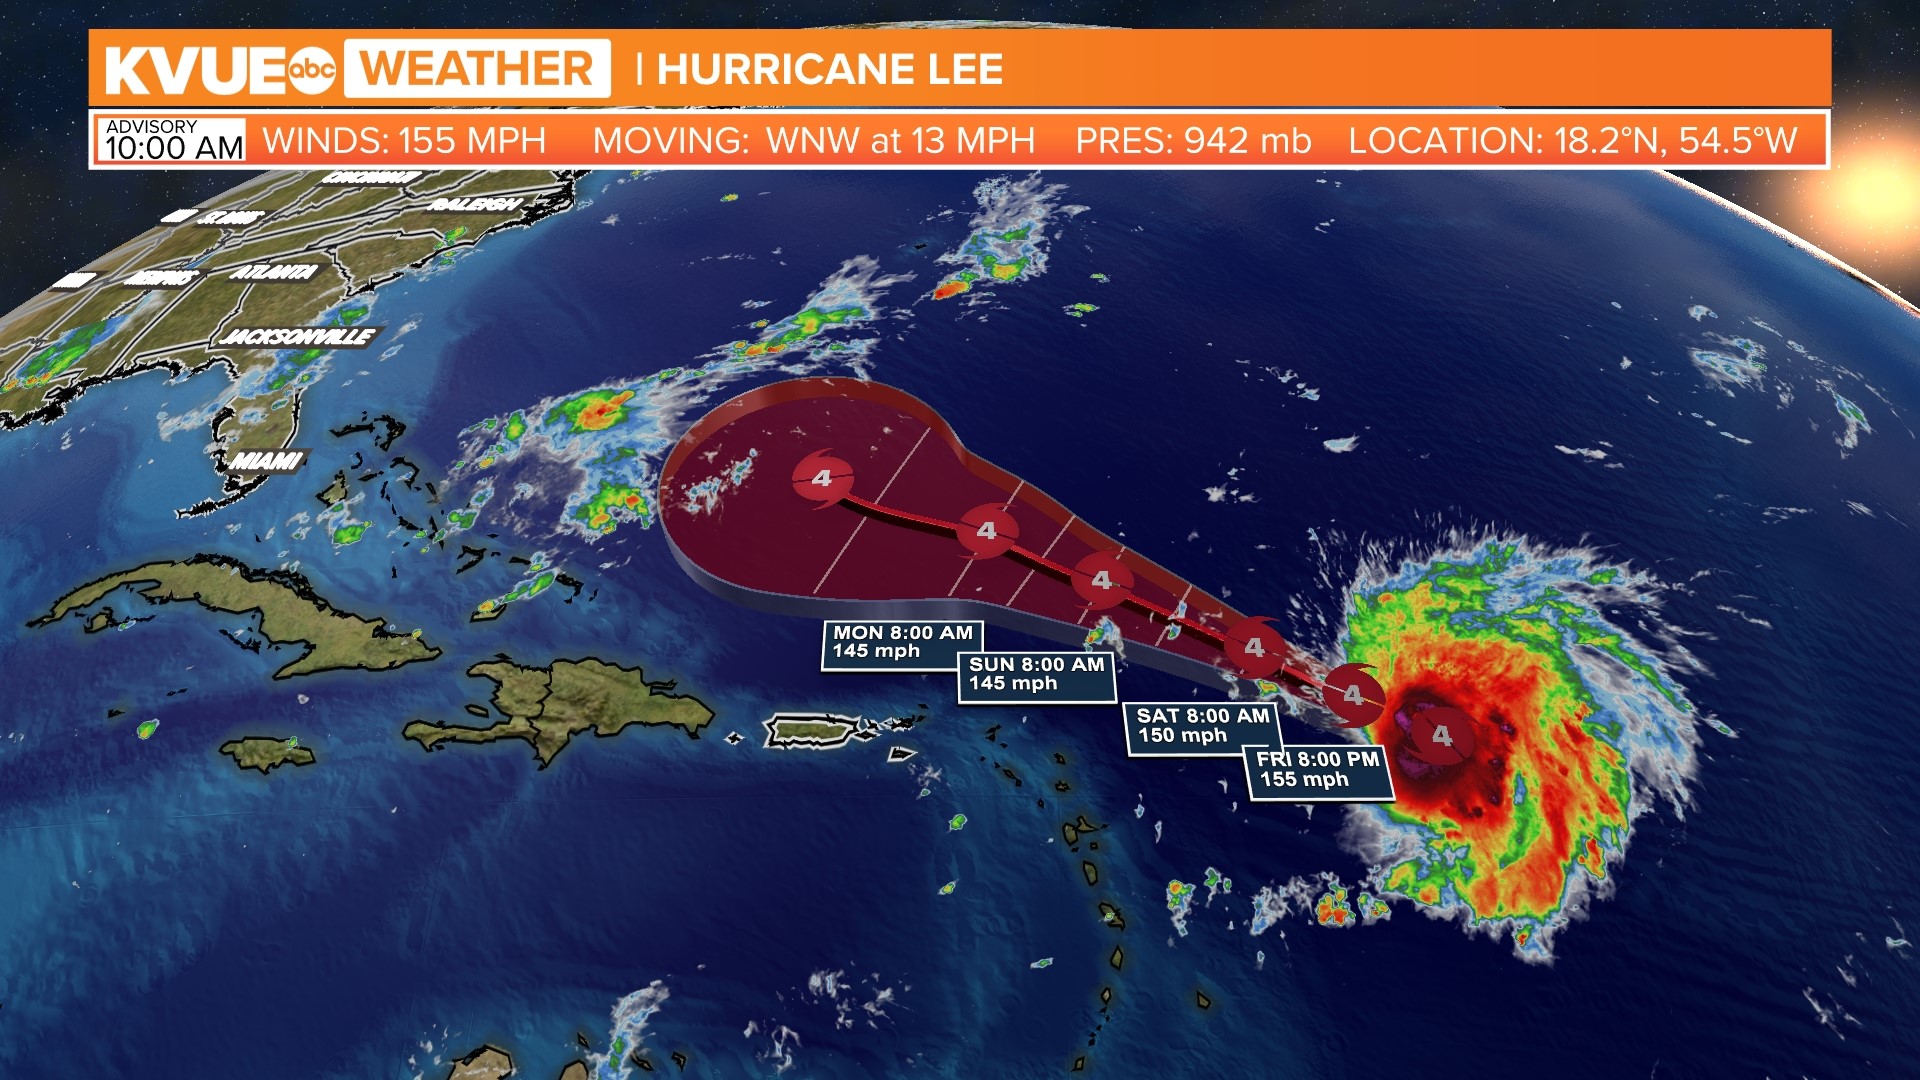 Hurricane Lee was a 180 mph Category 5 at one point but is now a Category 4